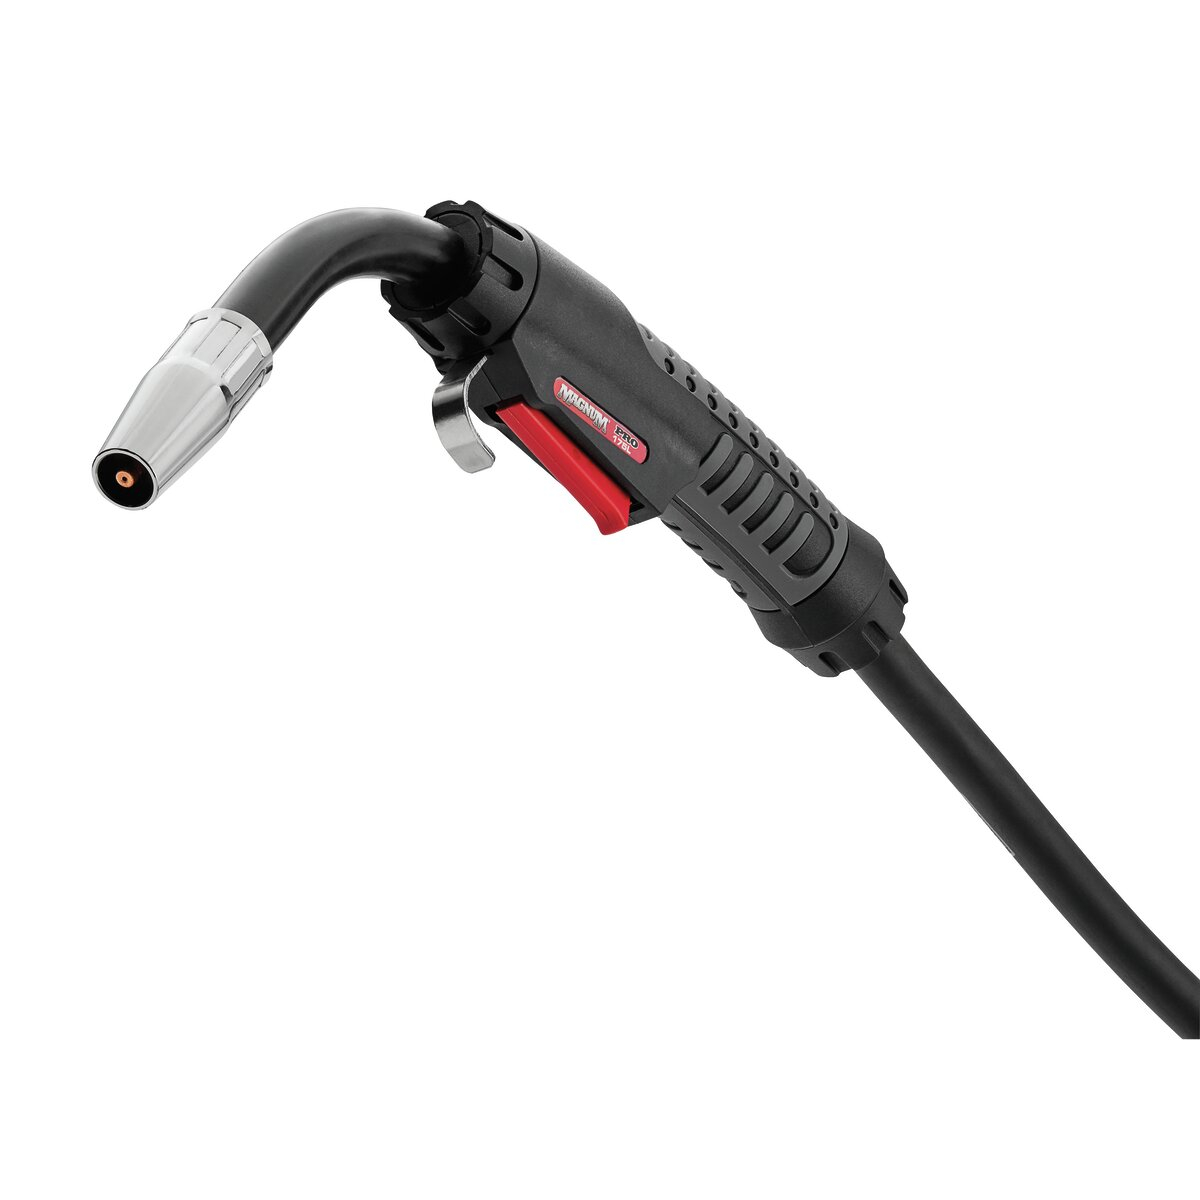 Magnum® PRO Semi-Automatic MIG welding gun with 175A 100% mixed gas duty cycle.